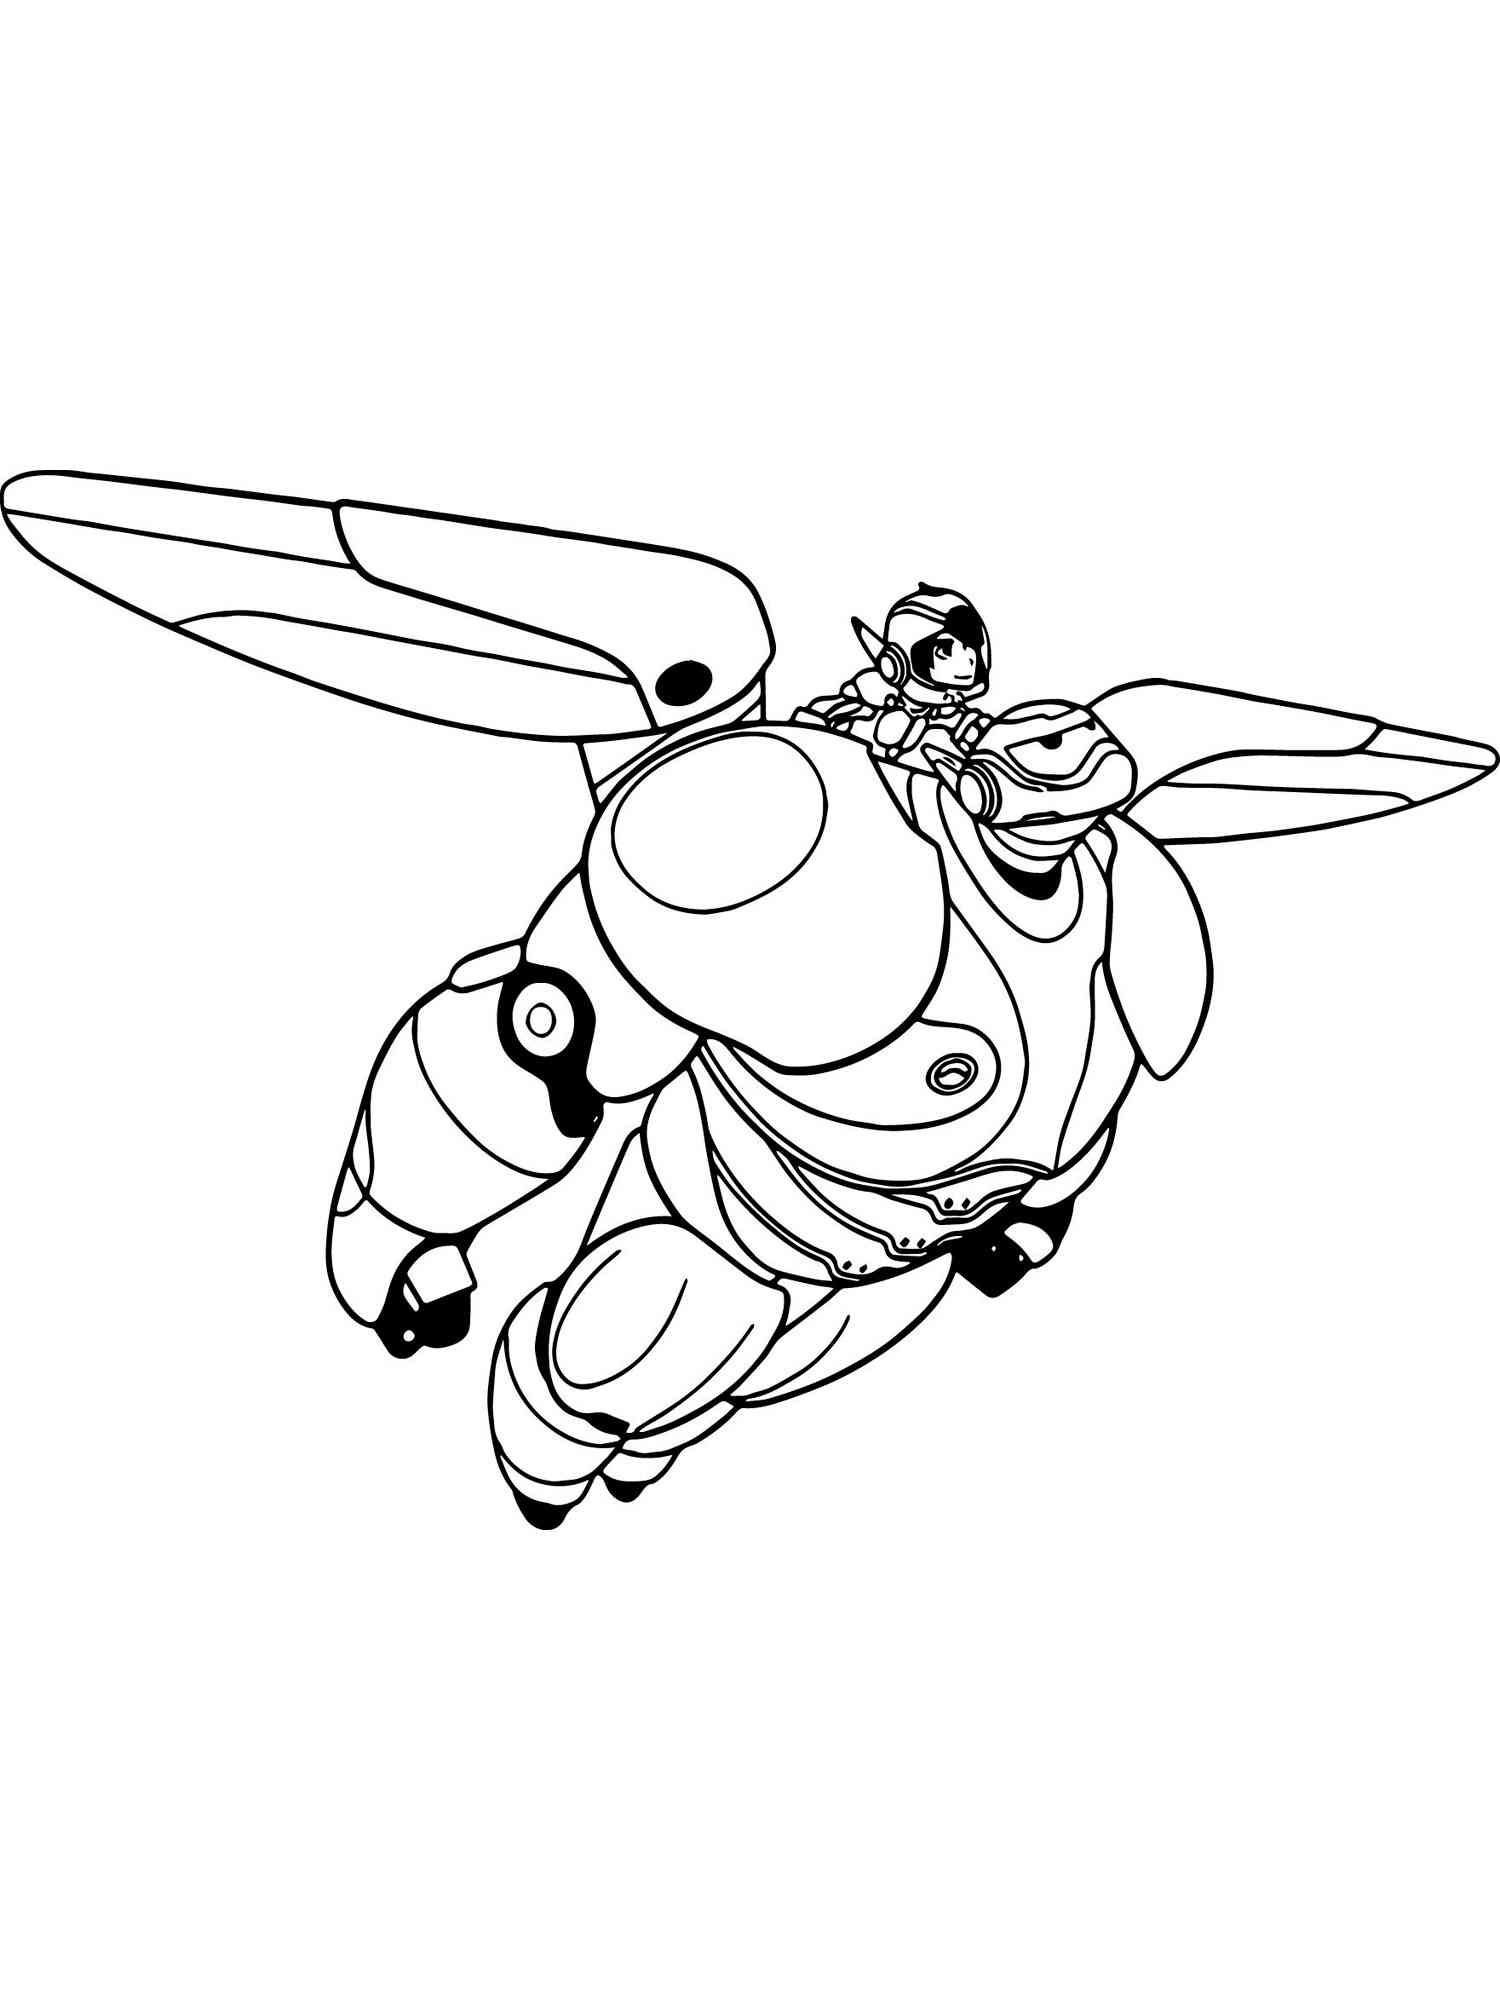 Baymax and Hiro are flying coloring page